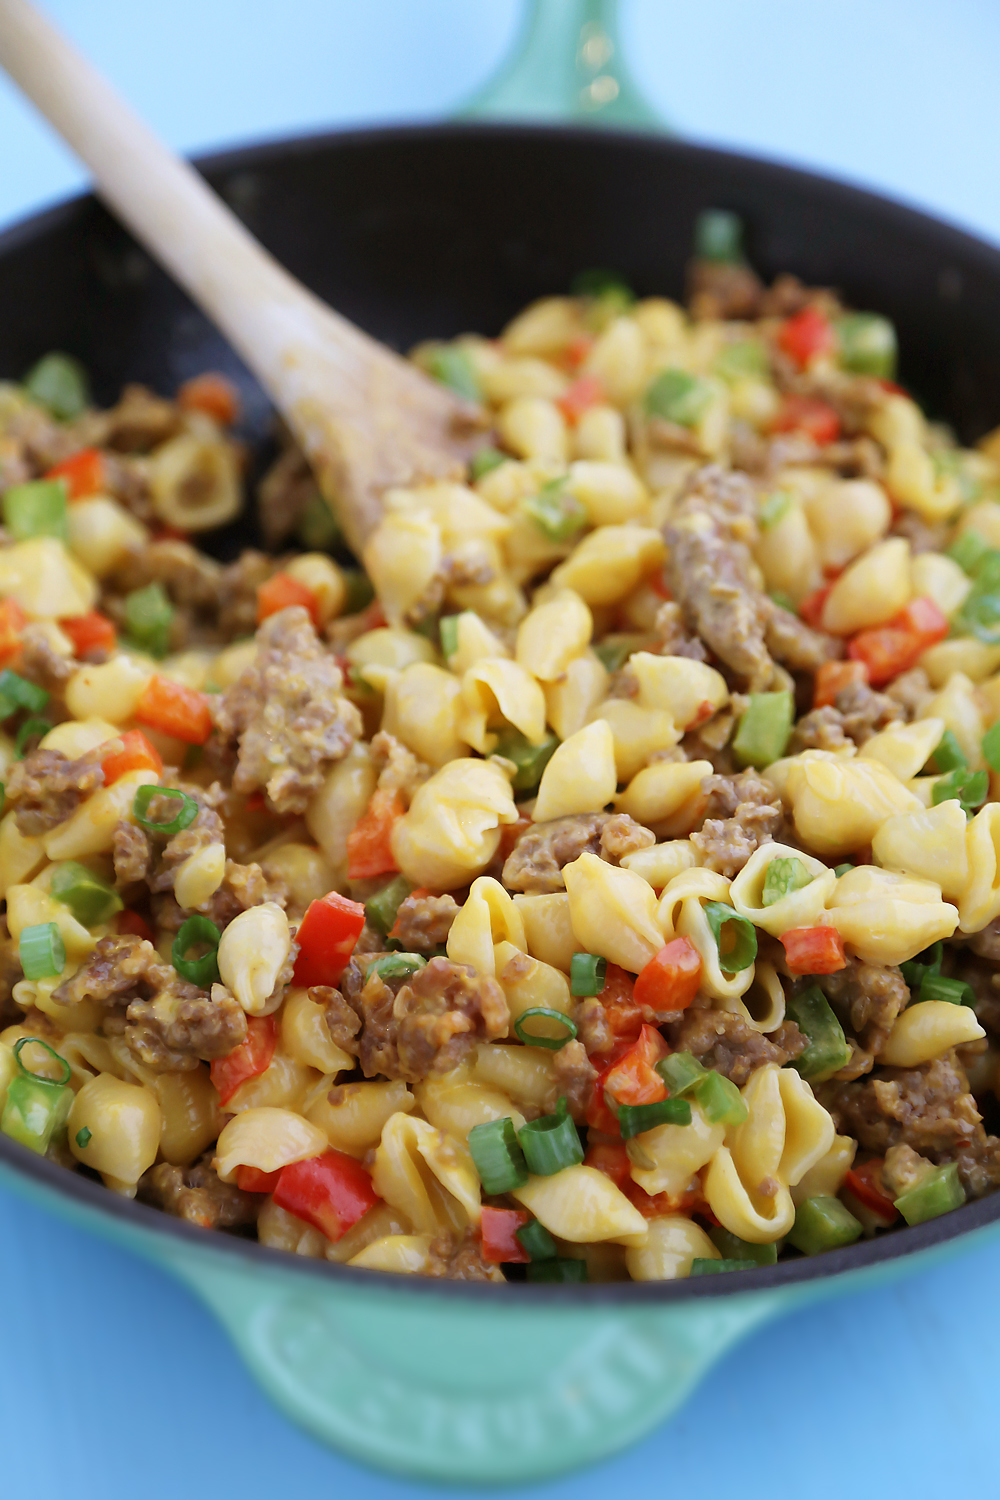 4-Ingredient Spicy Sausage and Pepper Mac 'n Cheese - Creamy, delicious pasta dinner with just a handful of easy ingredients! thecomfortofcooking.com